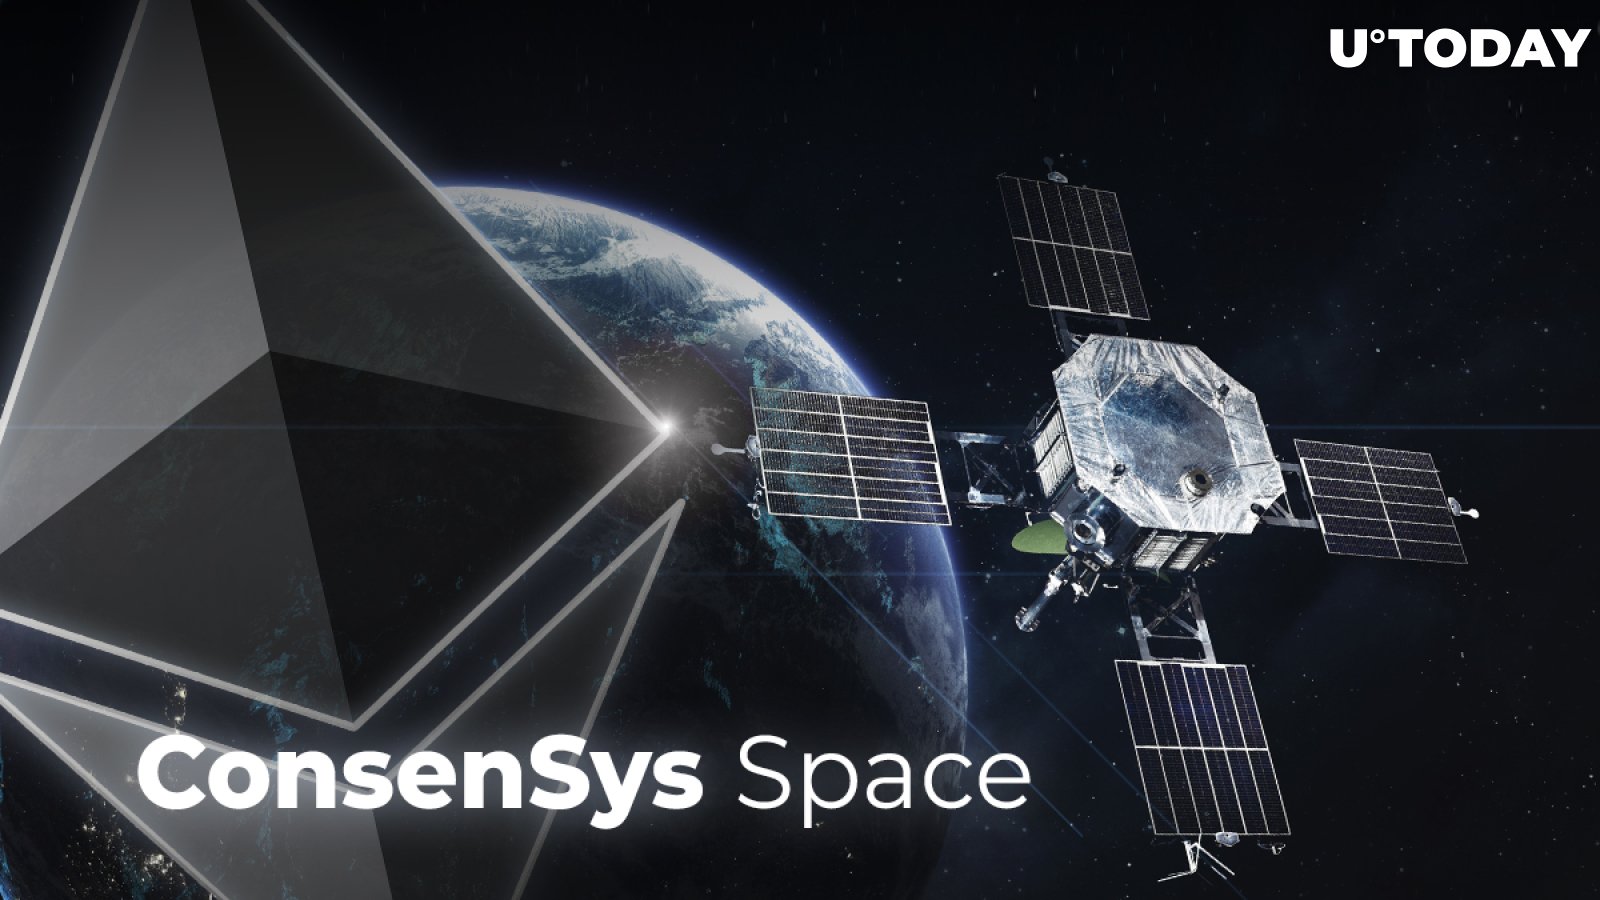 Ethereum-Based ConsenSys Space Drops Asteroid Mining for Tracking Satellites via DLT App